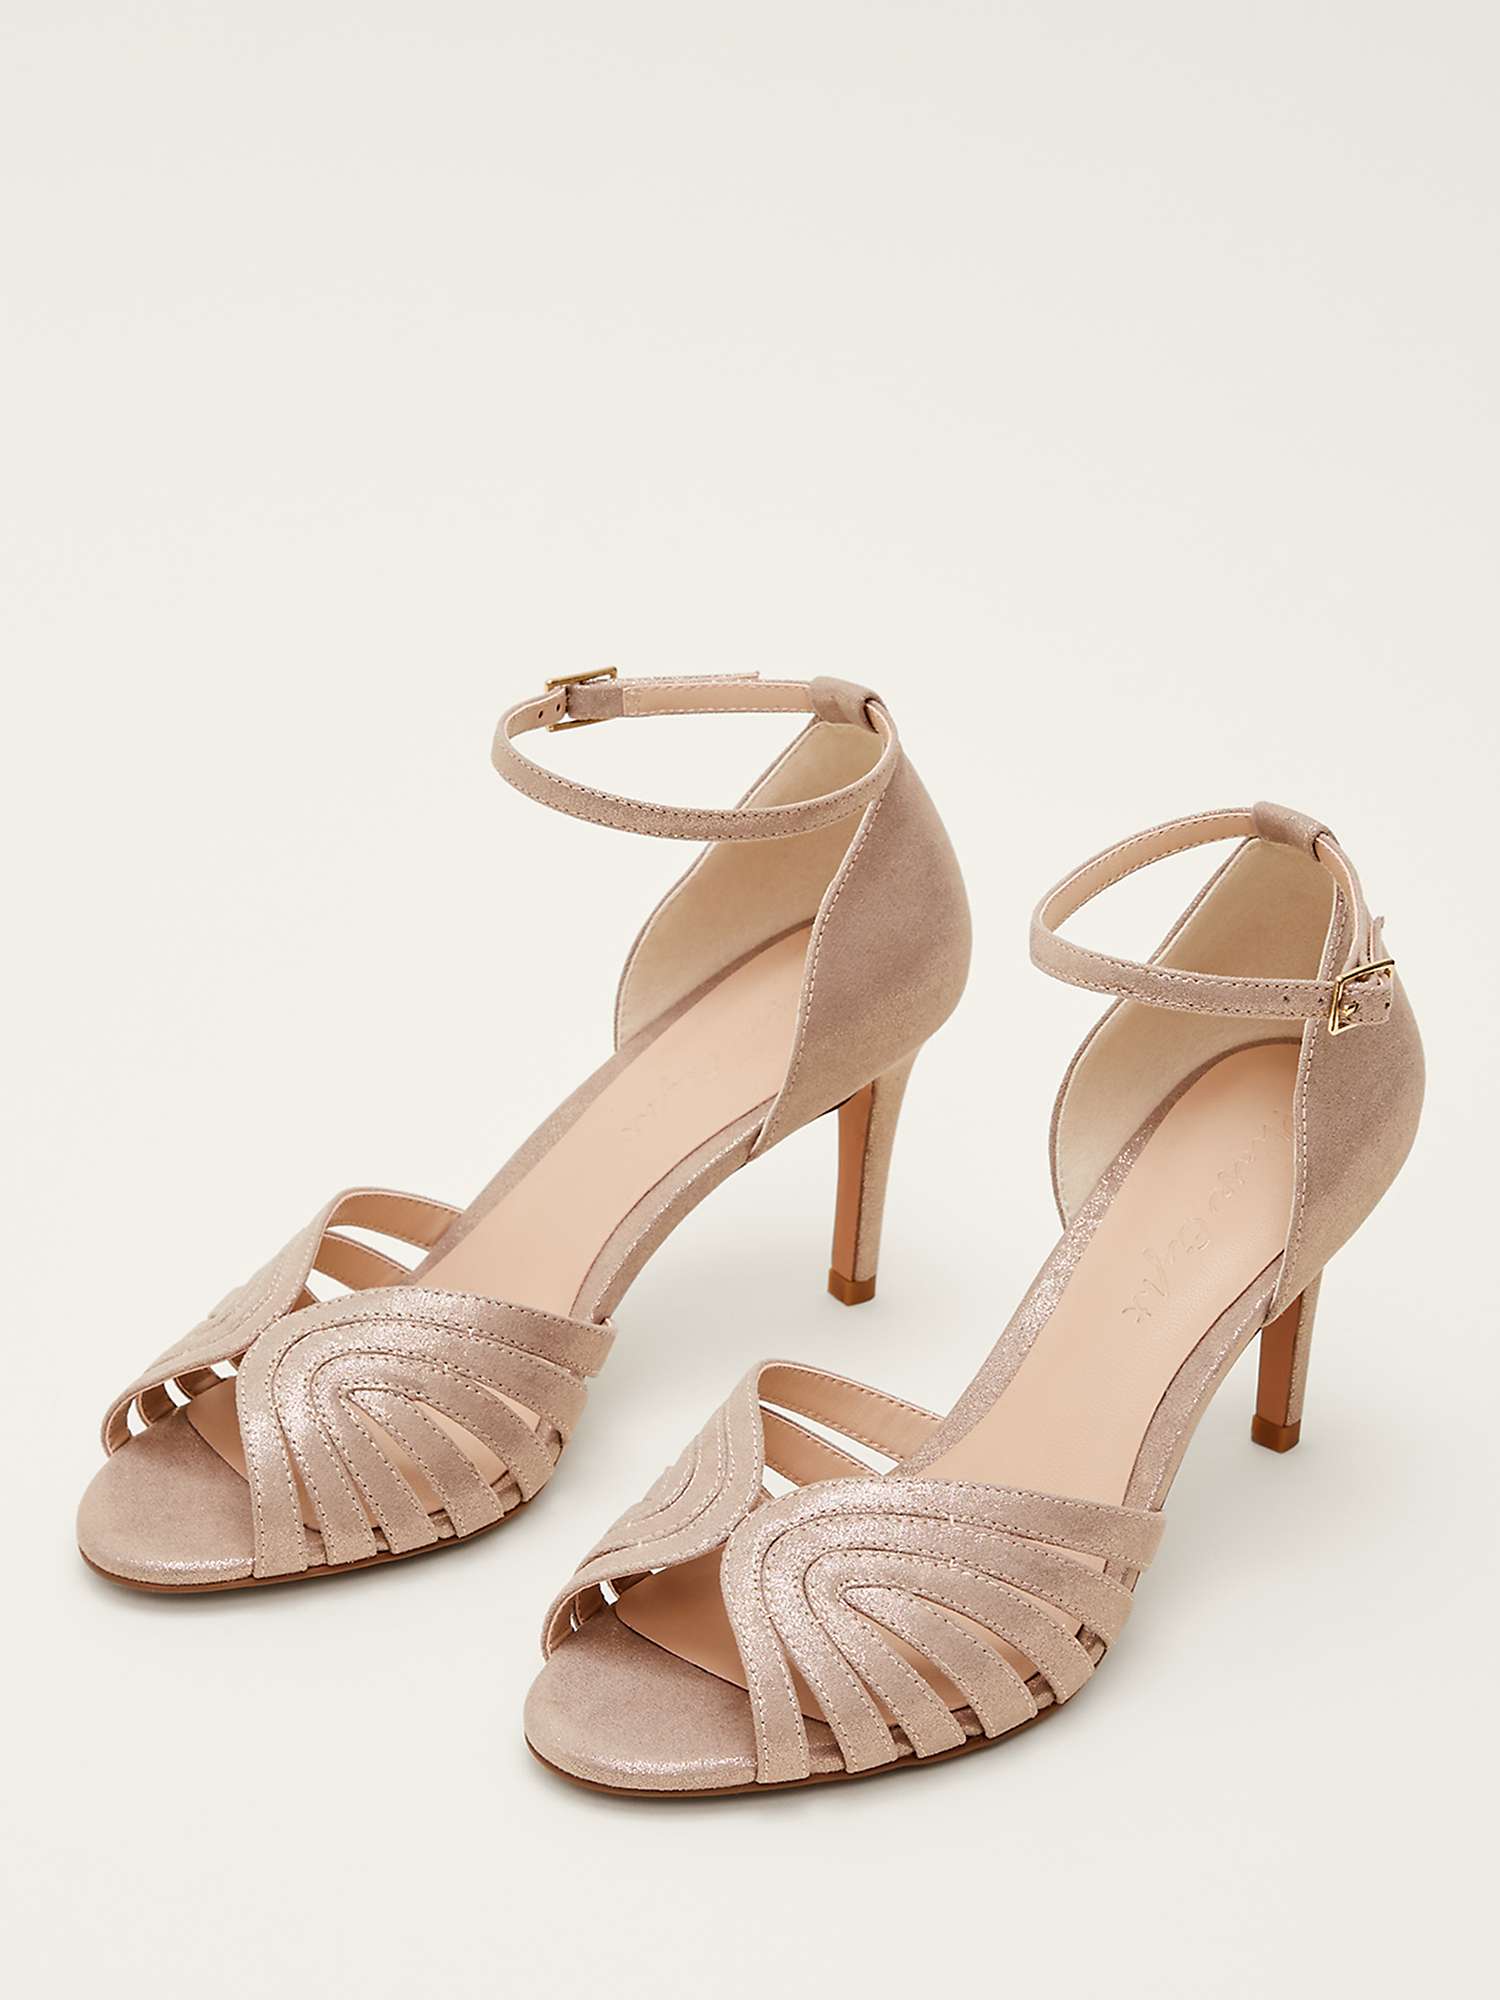 Buy Phase Eight Metallic Strappy Sandals, Gold Online at johnlewis.com